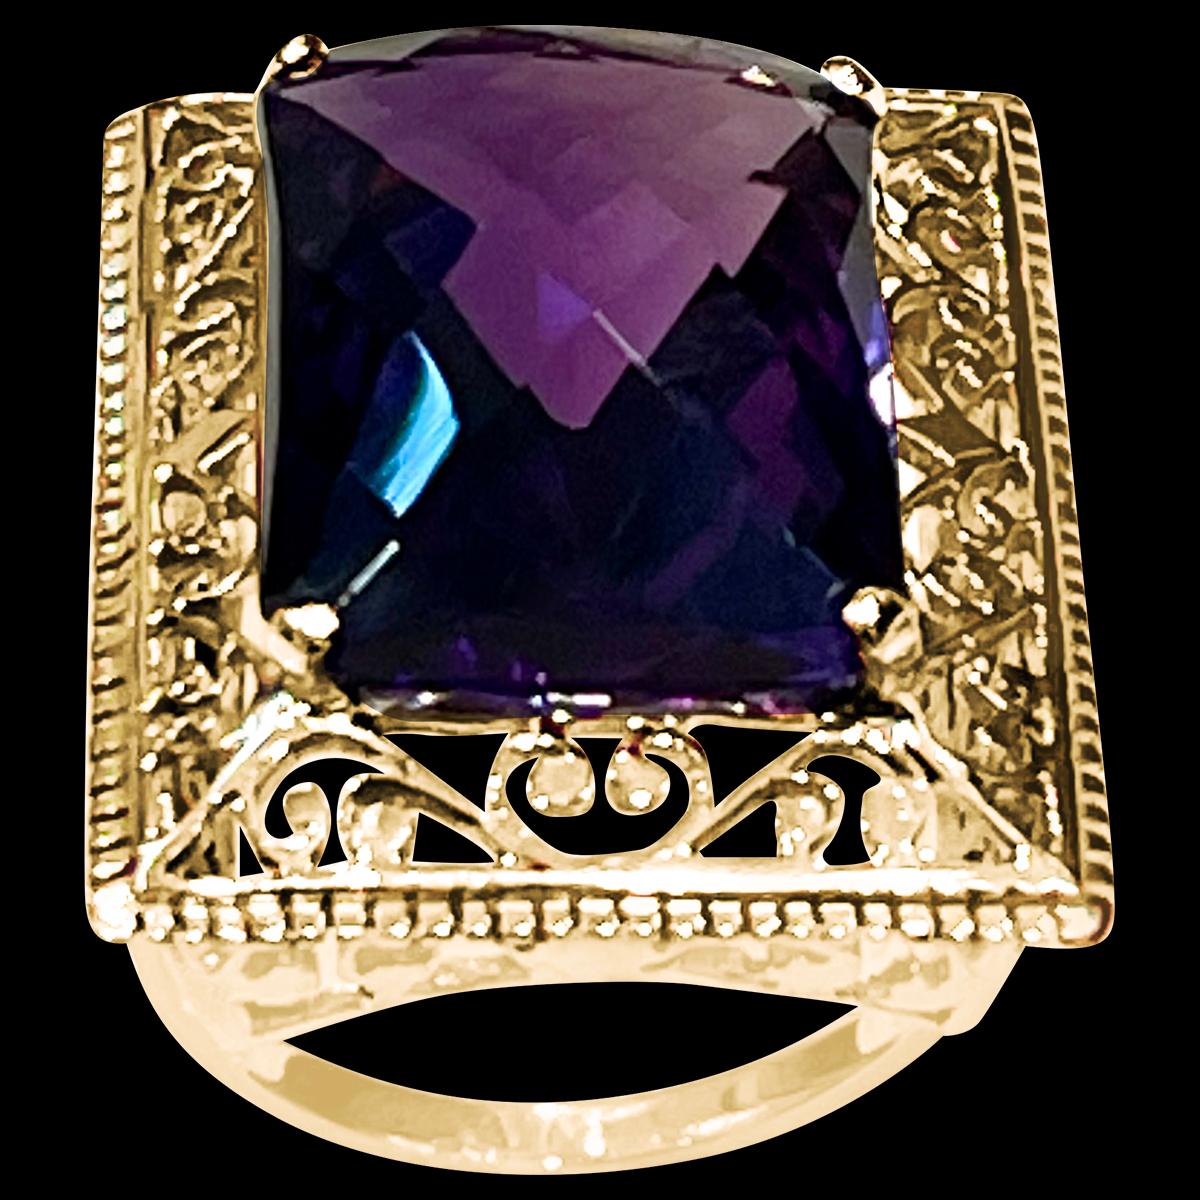 Exact 13.5 Carat Checker Board Amethyst Filigree Cocktail Ring in 14 Karat Yellow Gold
This is a Beautiful Cocktail ring ring which has a  beautiful filigree design on all the borders of the ring.
There is large  13.5  carat of Light color Amethyst 